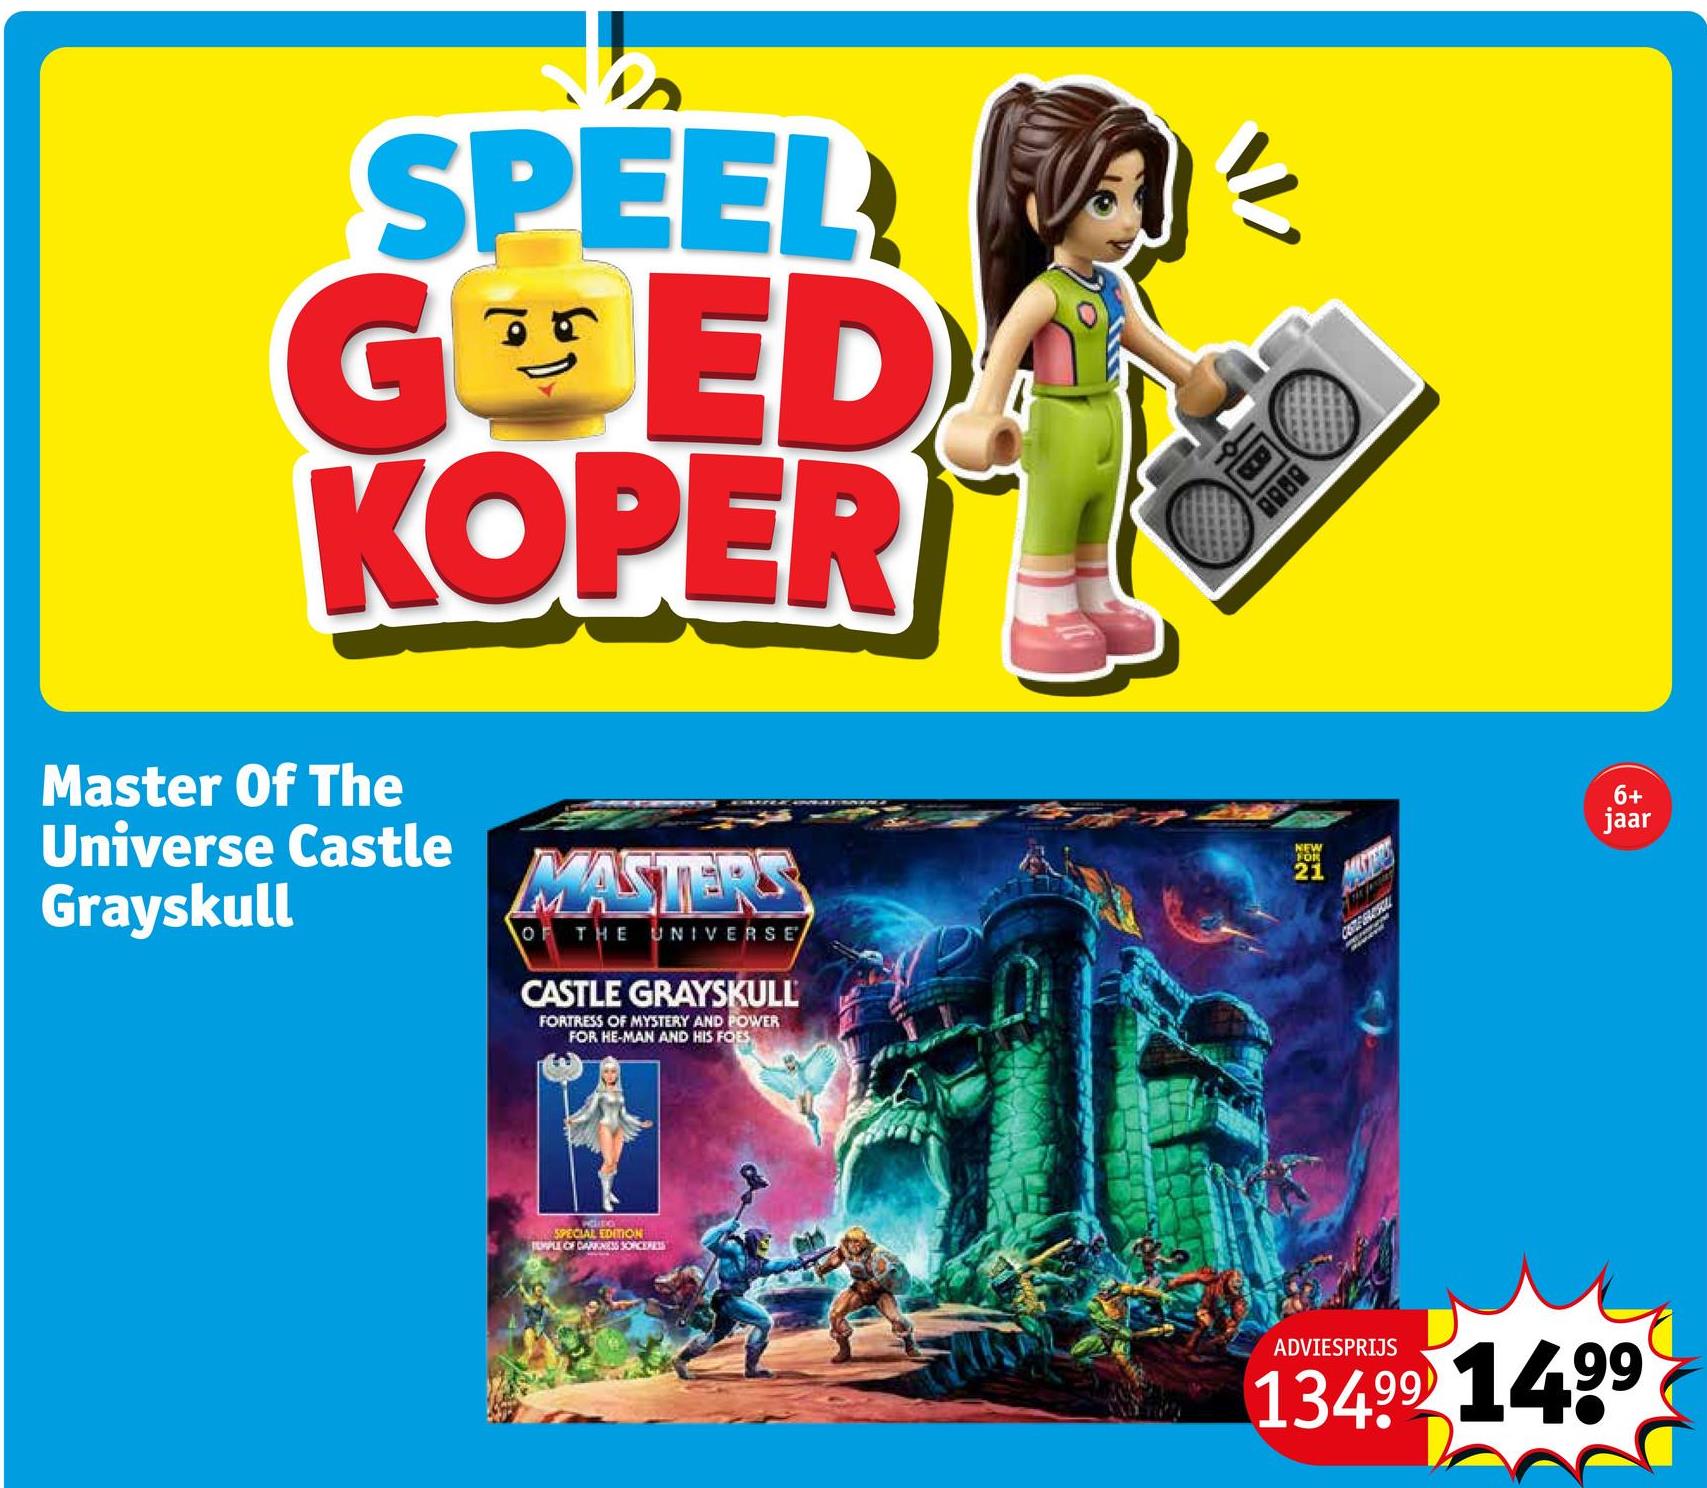 SPEEL
GOED
KOPER
Master Of The
Universe Castle
Grayskull
MASTERS
OF THE UNIVERSE
CASTLE GRAYSKULL
FORTRESS OF MYSTERY AND POWER
FOR HE-MAN AND HIS FOES
SPECIAL EDITION
TEMPLE OF DARKNESS SORCERESS
8088
NEW
FOR
21
CESTE SARROL
6+
jaar
ADVIESPRIJS
13499 1499